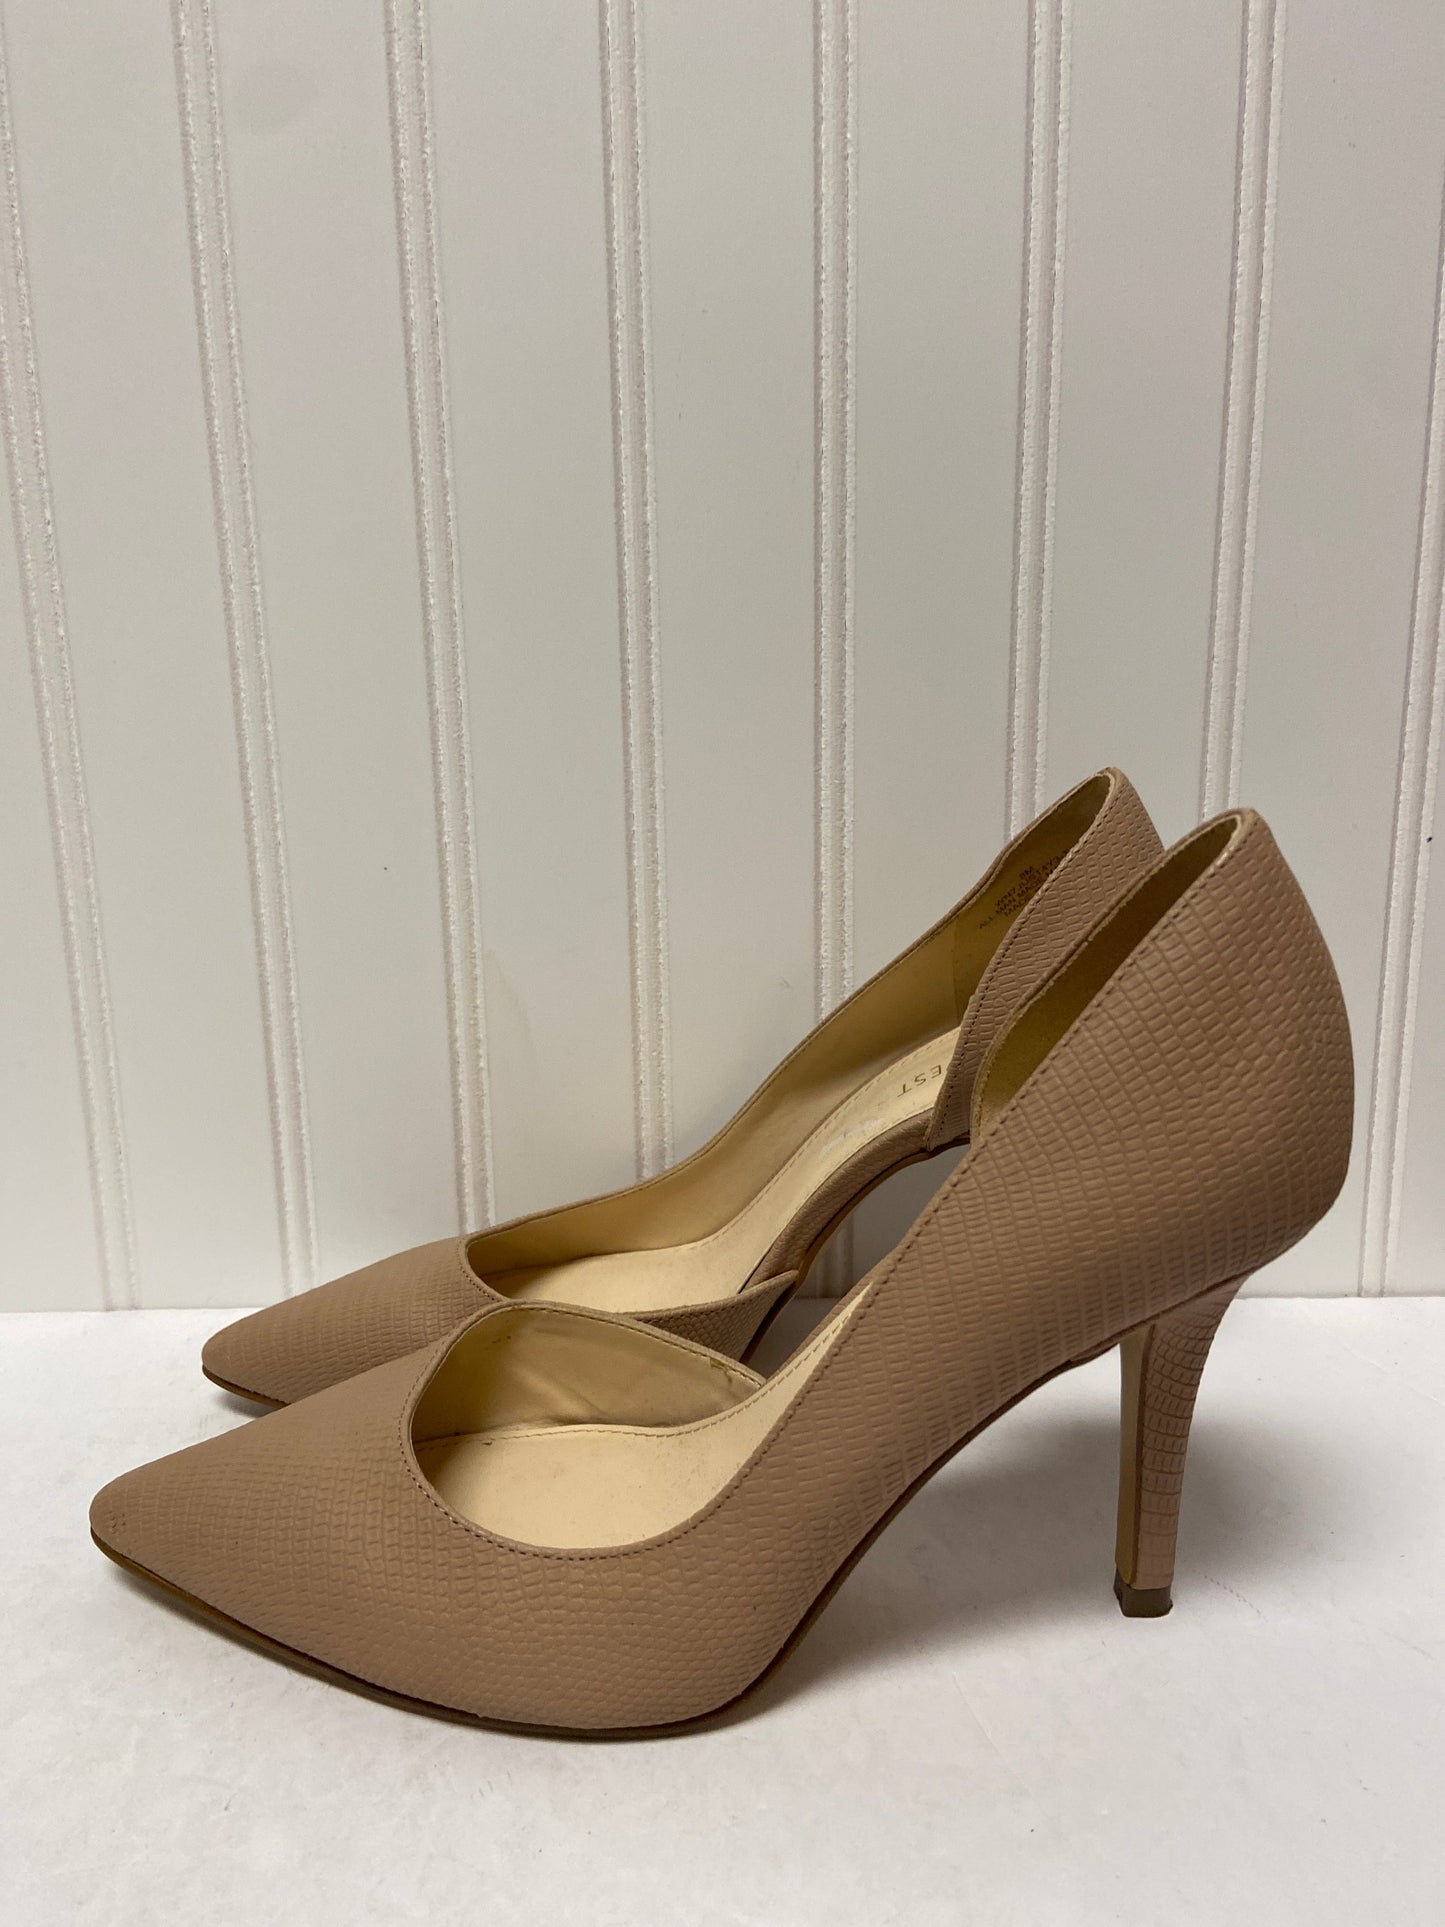 Taupe Shoes Heels Stiletto Nine West, Size 8